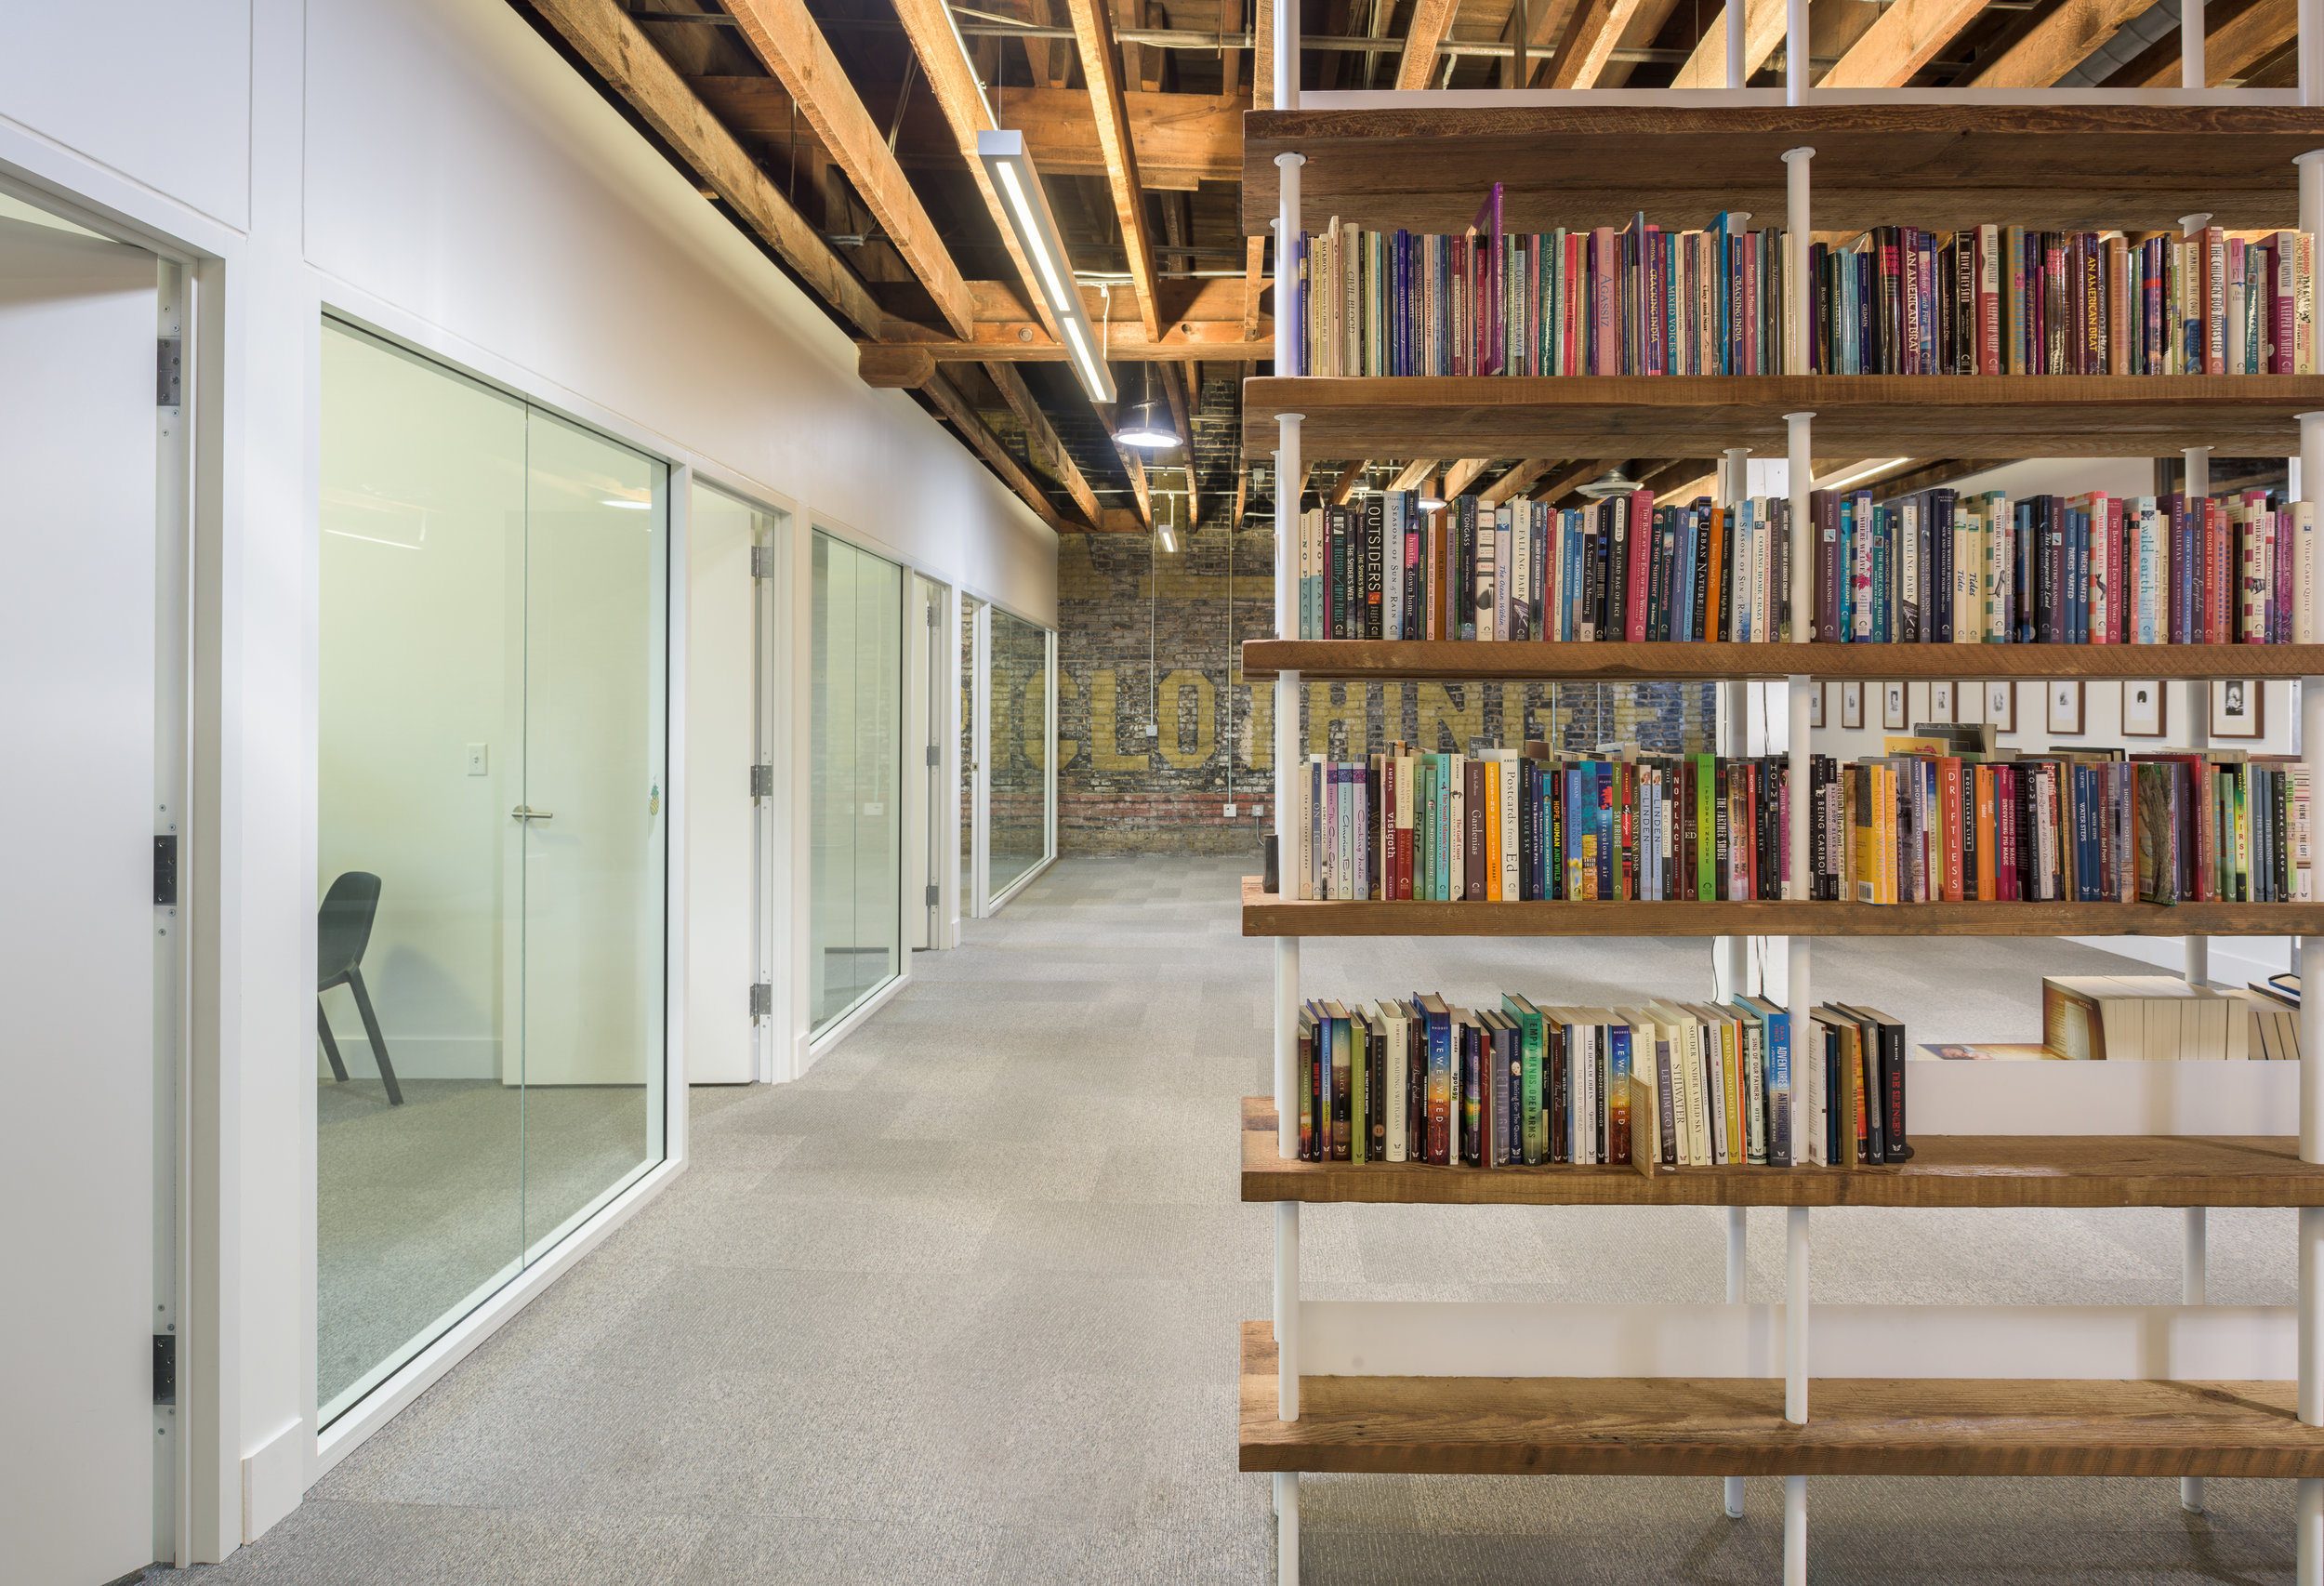 Custom metal and wood bookshelves in modern office space by Christian Dean Architecture.